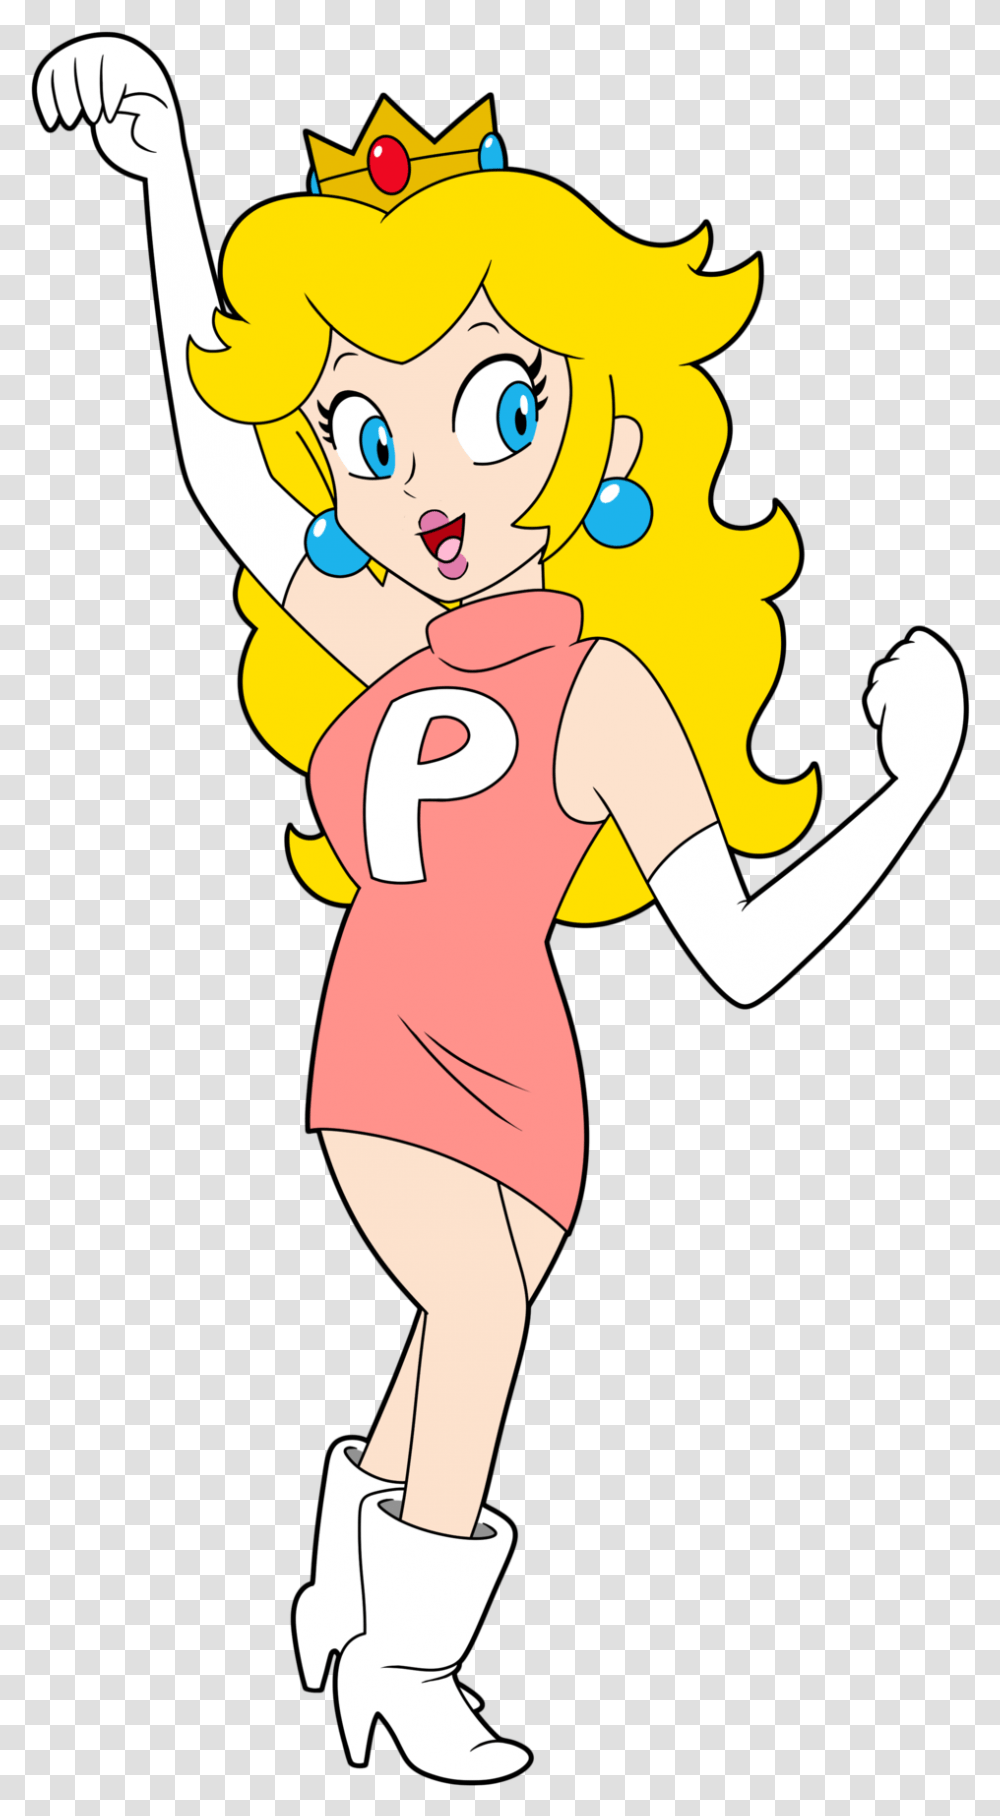 Peach From The Super Mario Compact Disco Paul Blart Mall Cop, Person, Female, Leisure Activities Transparent Png